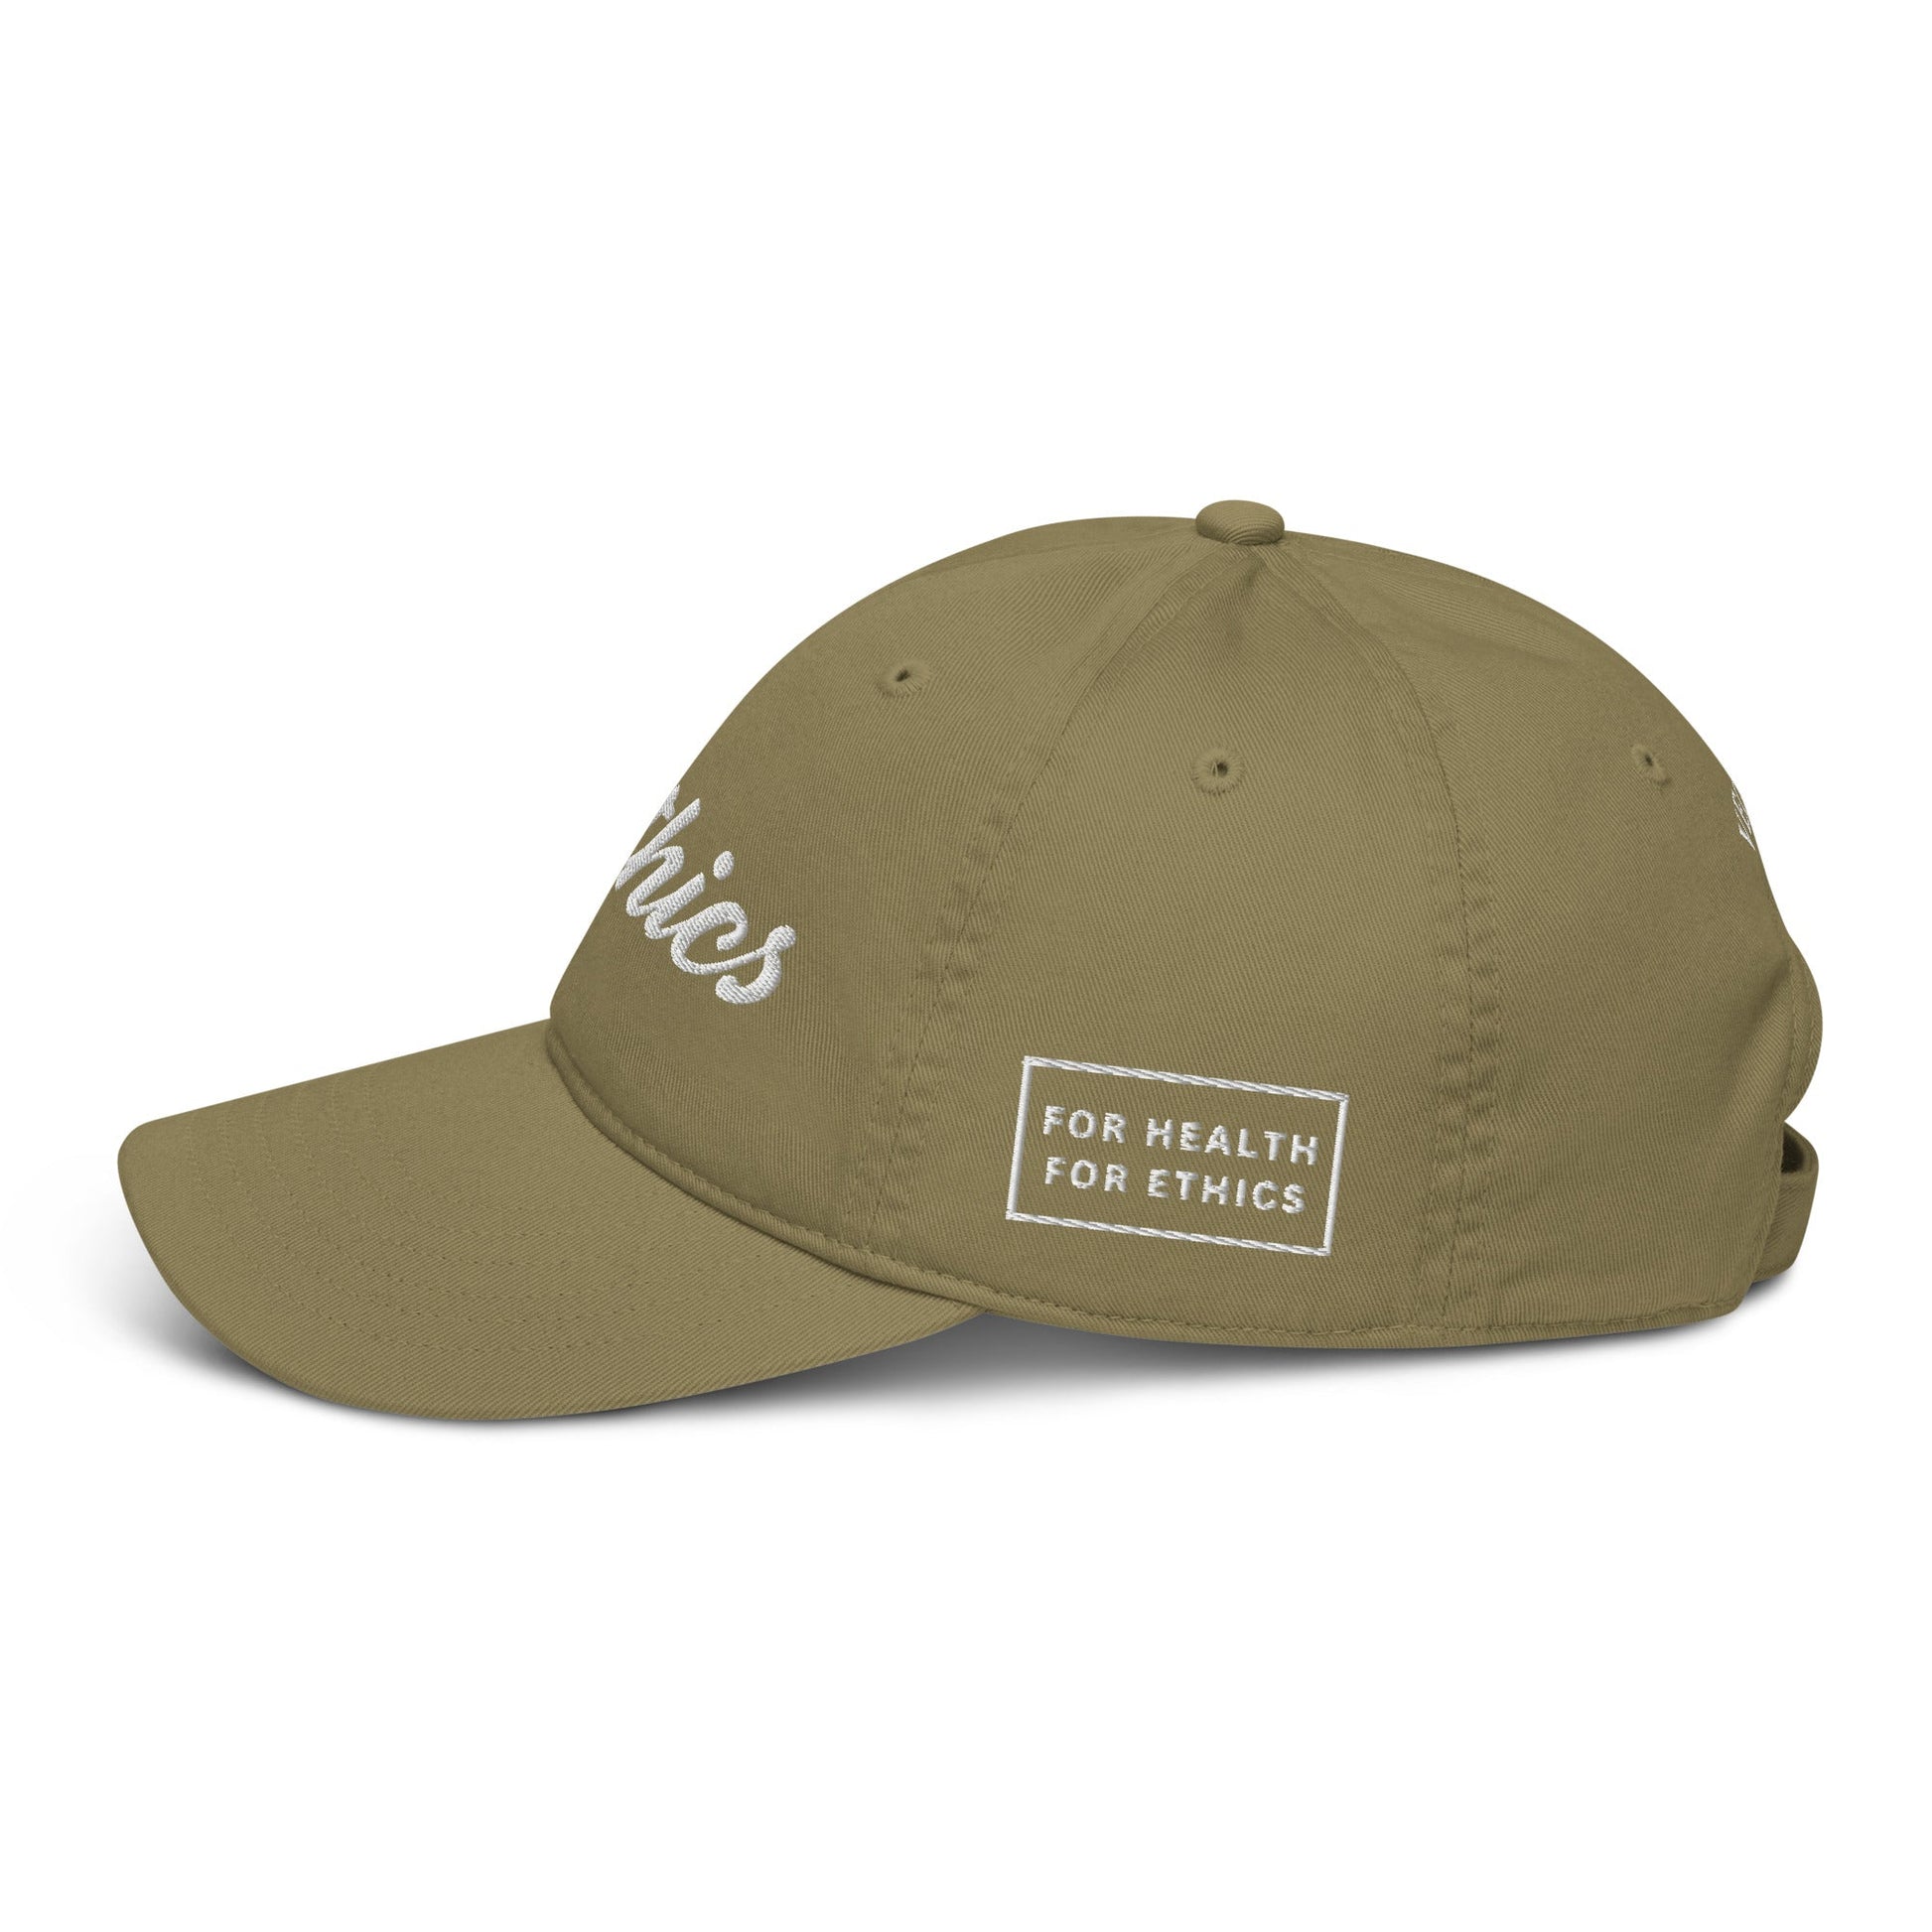 4 Ethics Organic Hat - For Health For Ethics - Jungle - Side